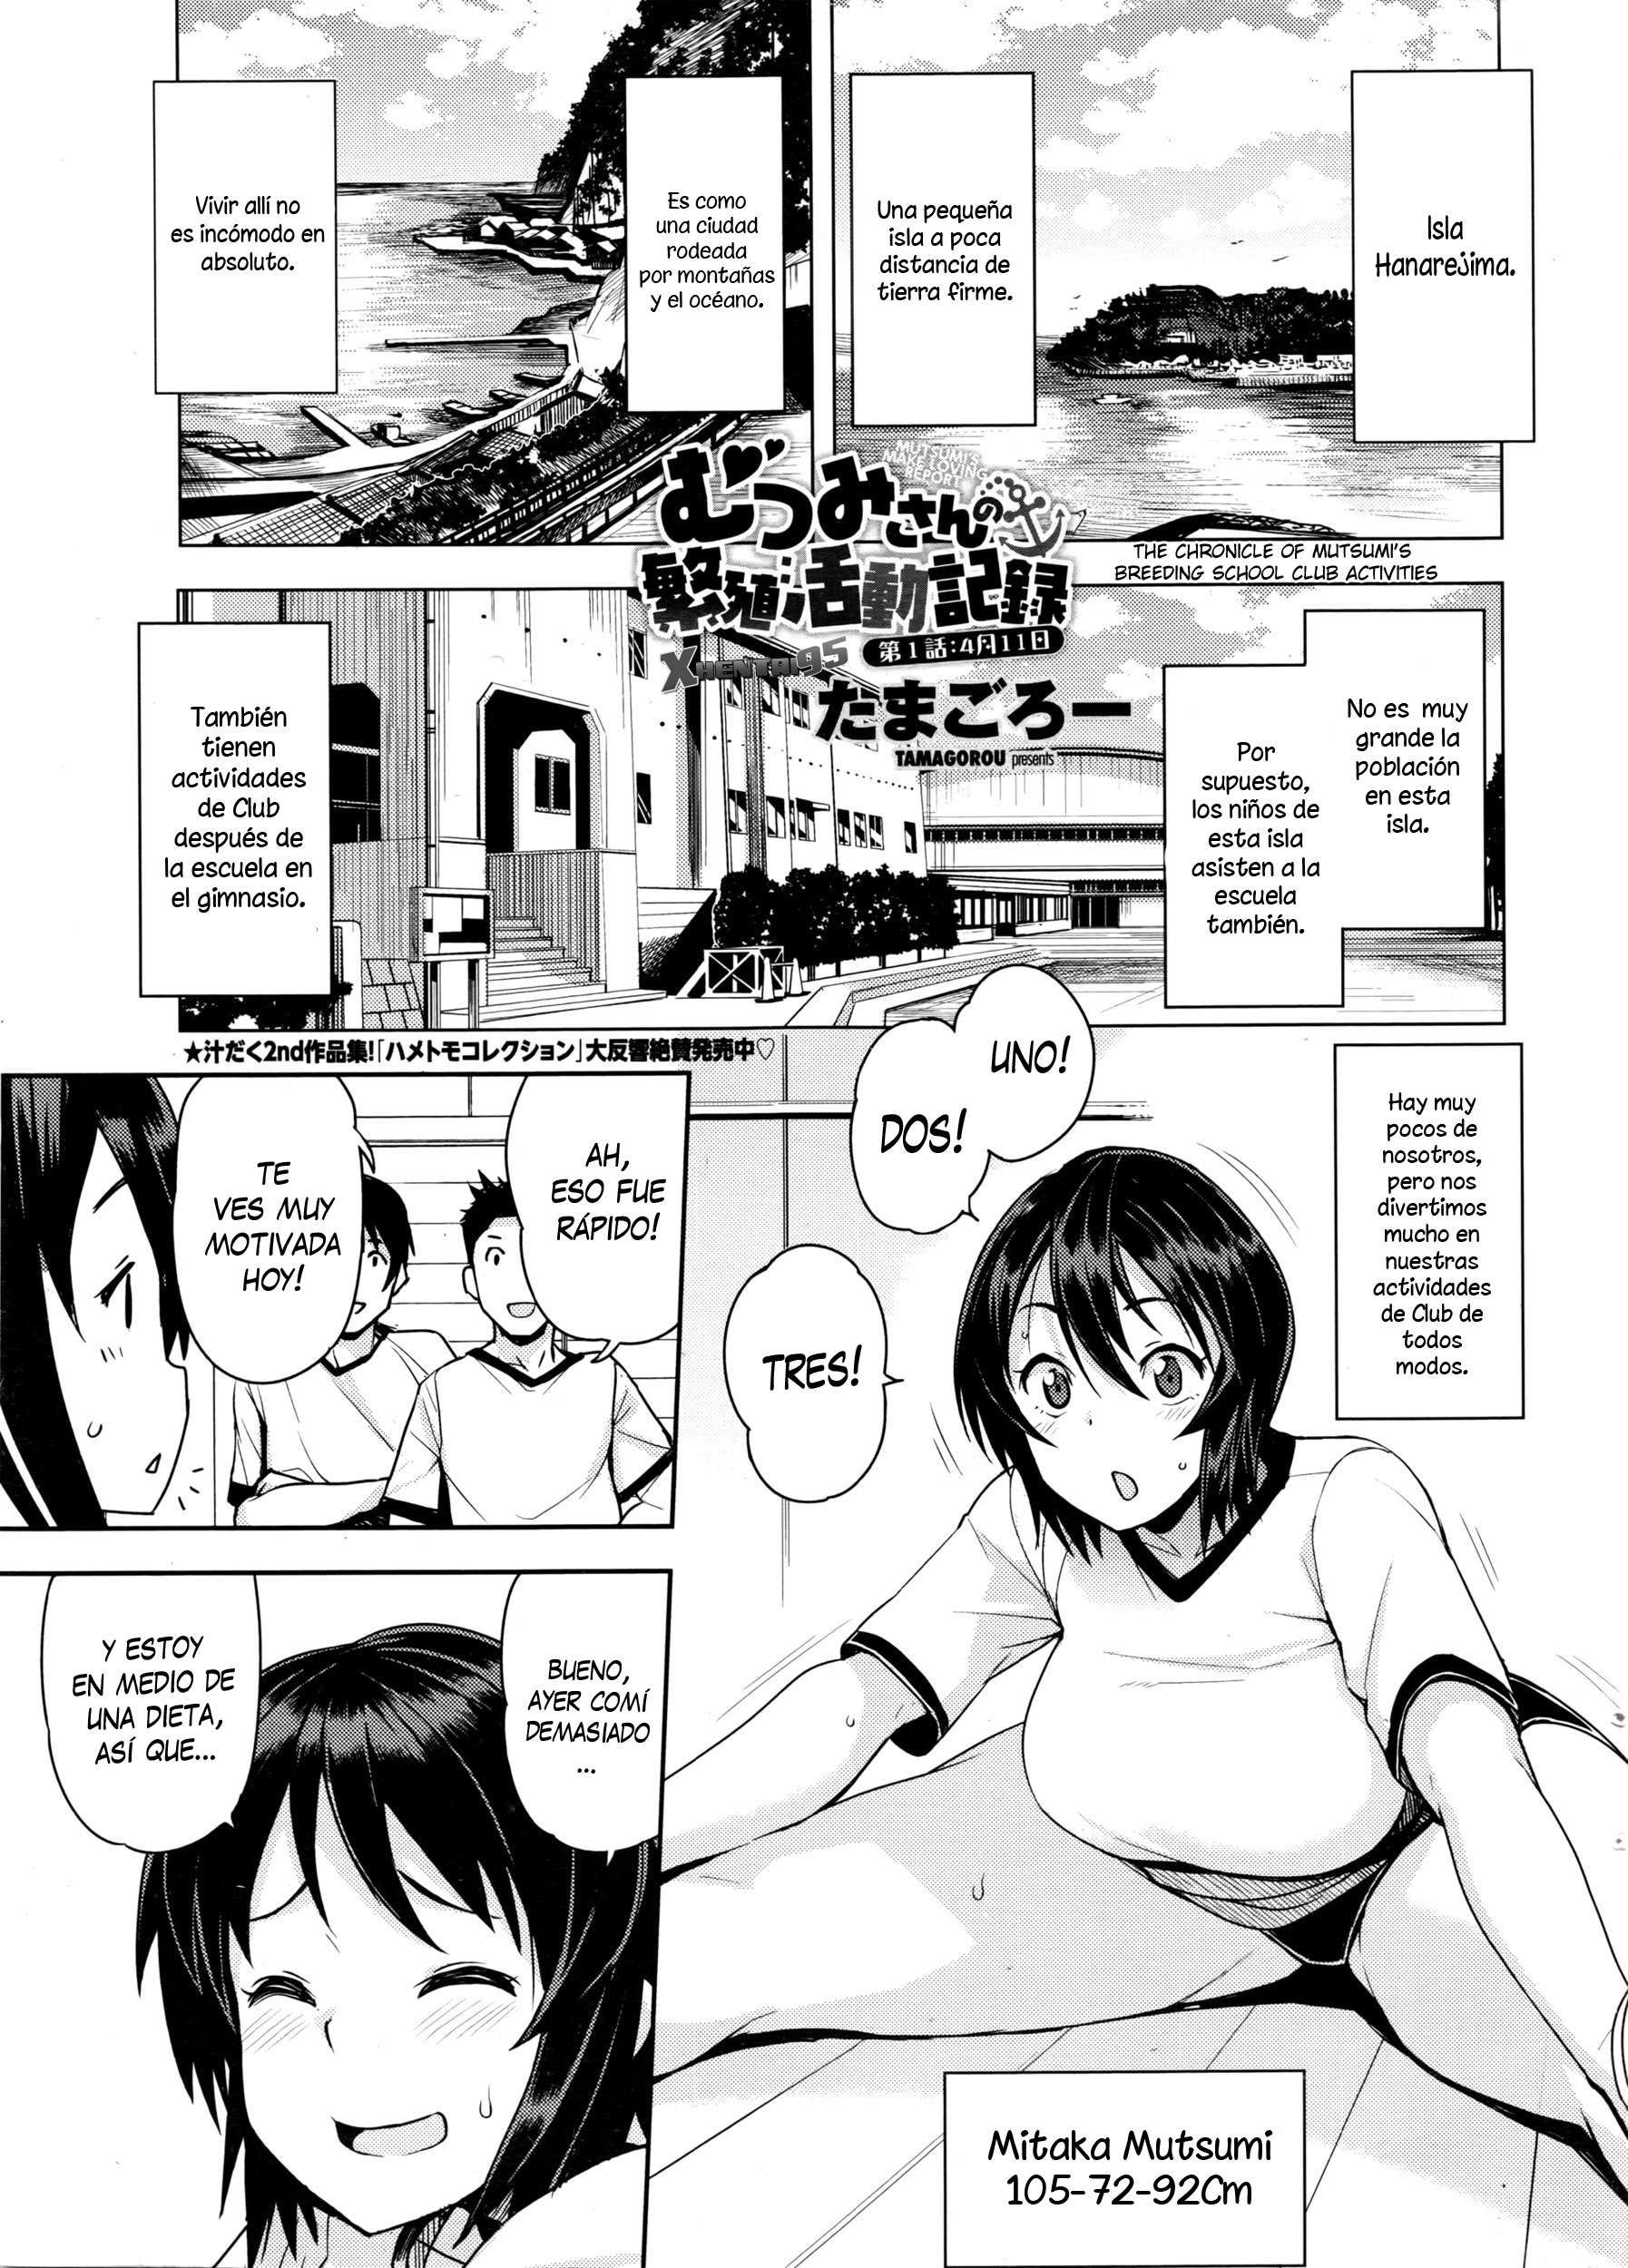 The Chronicle of Mutsumi's Breeding School Club Activities Chapter-1 - 0